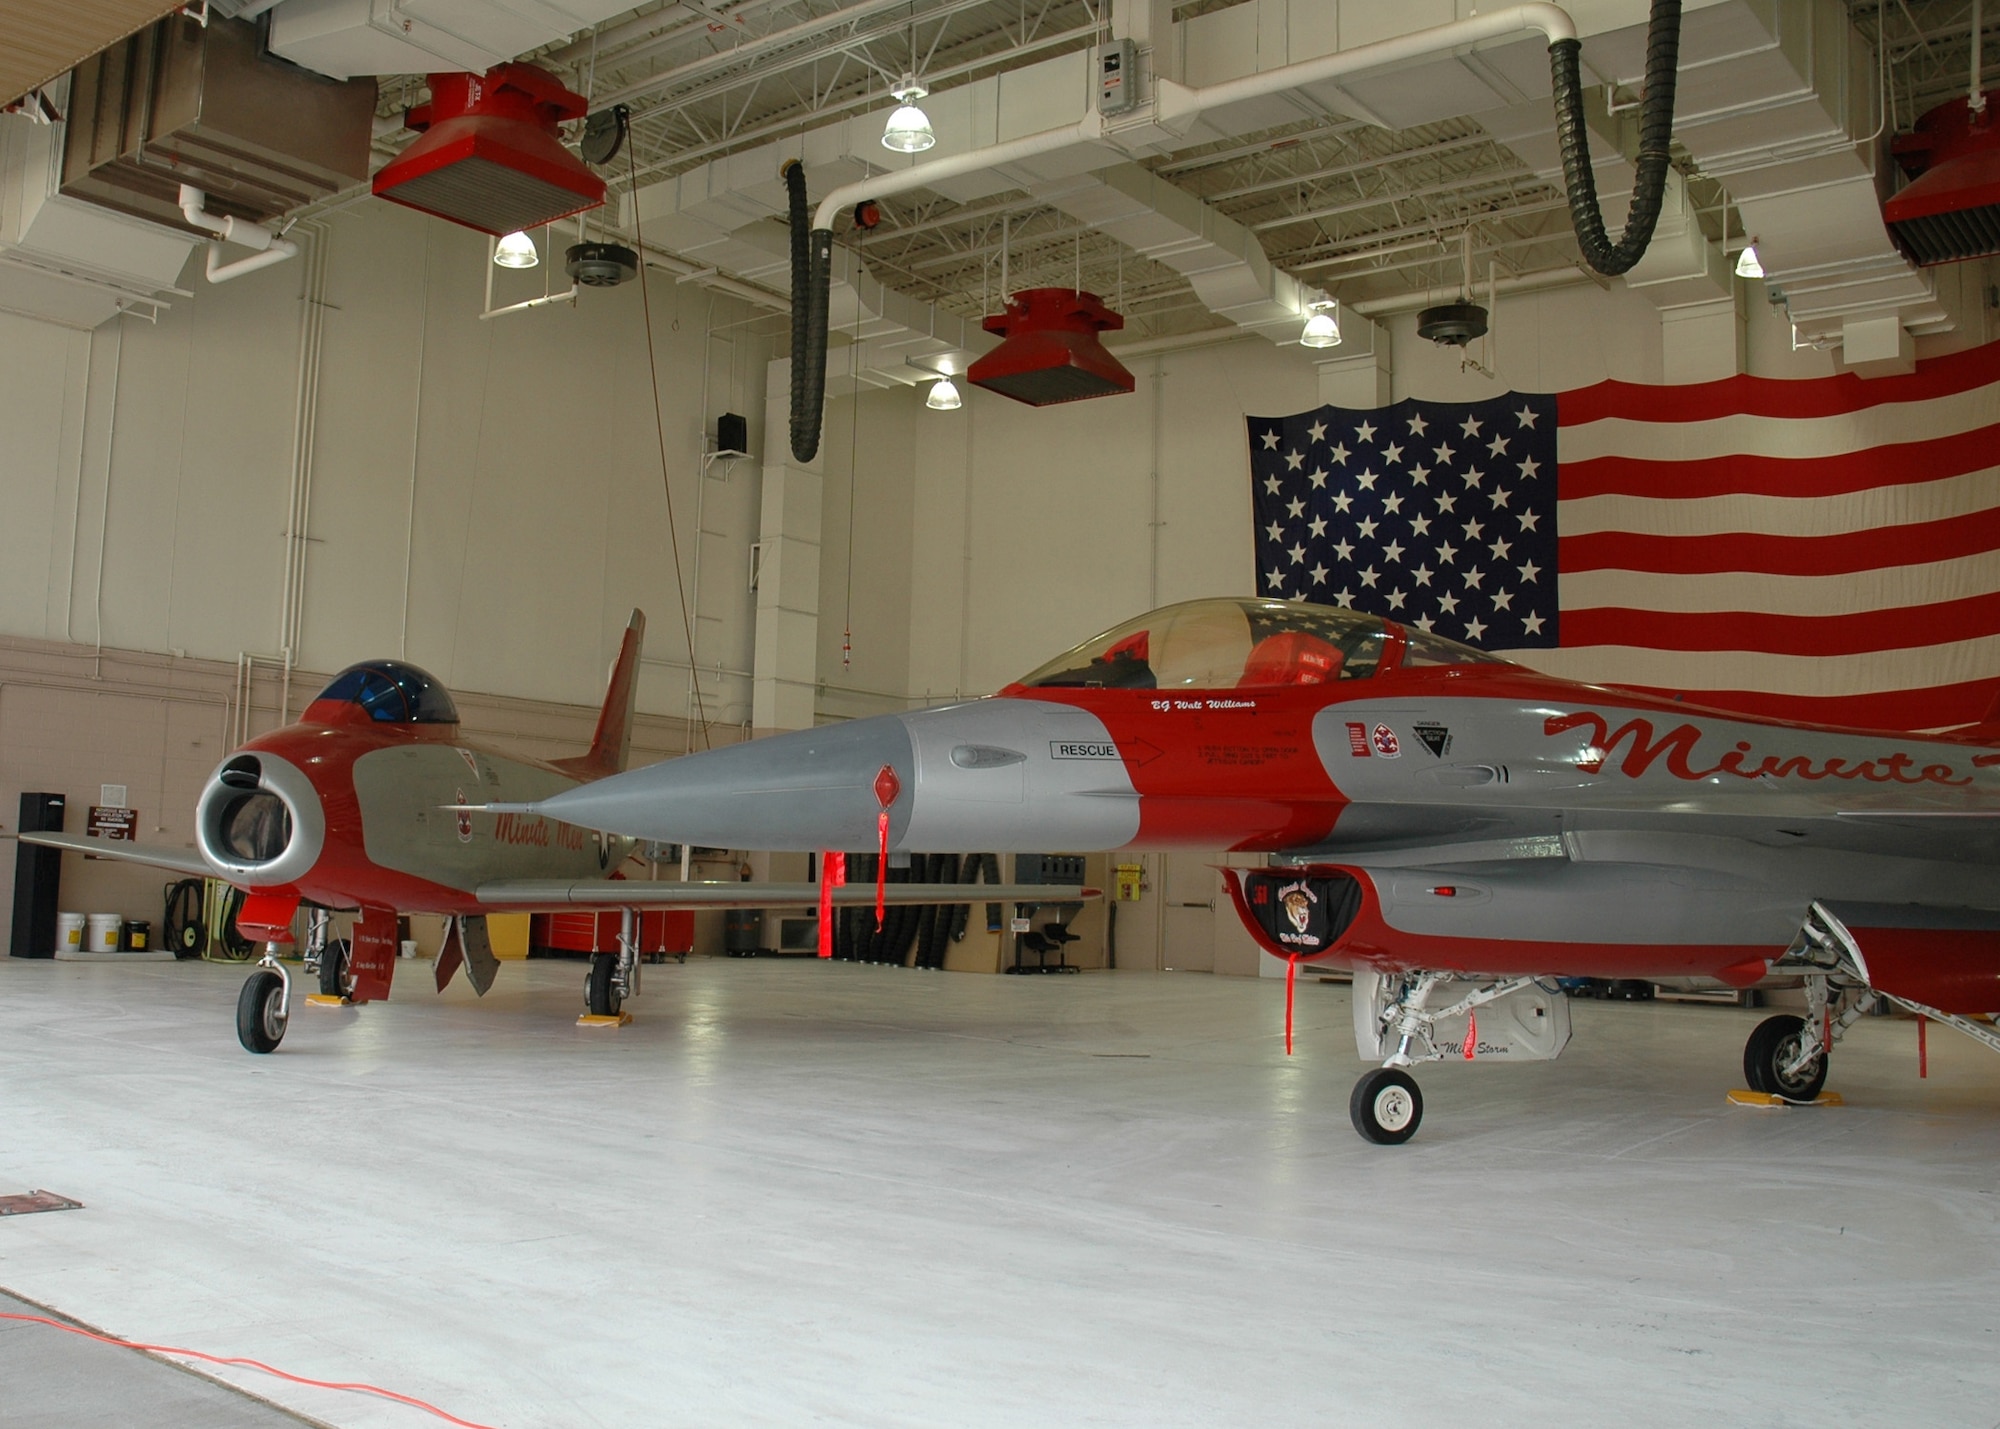 The 140th Wing unveiled an F-16 Tuesday that has been painted to resemble the markings of th F-86 originally flown by the Minute Men aerial demonstration team. (U.S. Air Force photo by Mrs. Barbara Atwell)